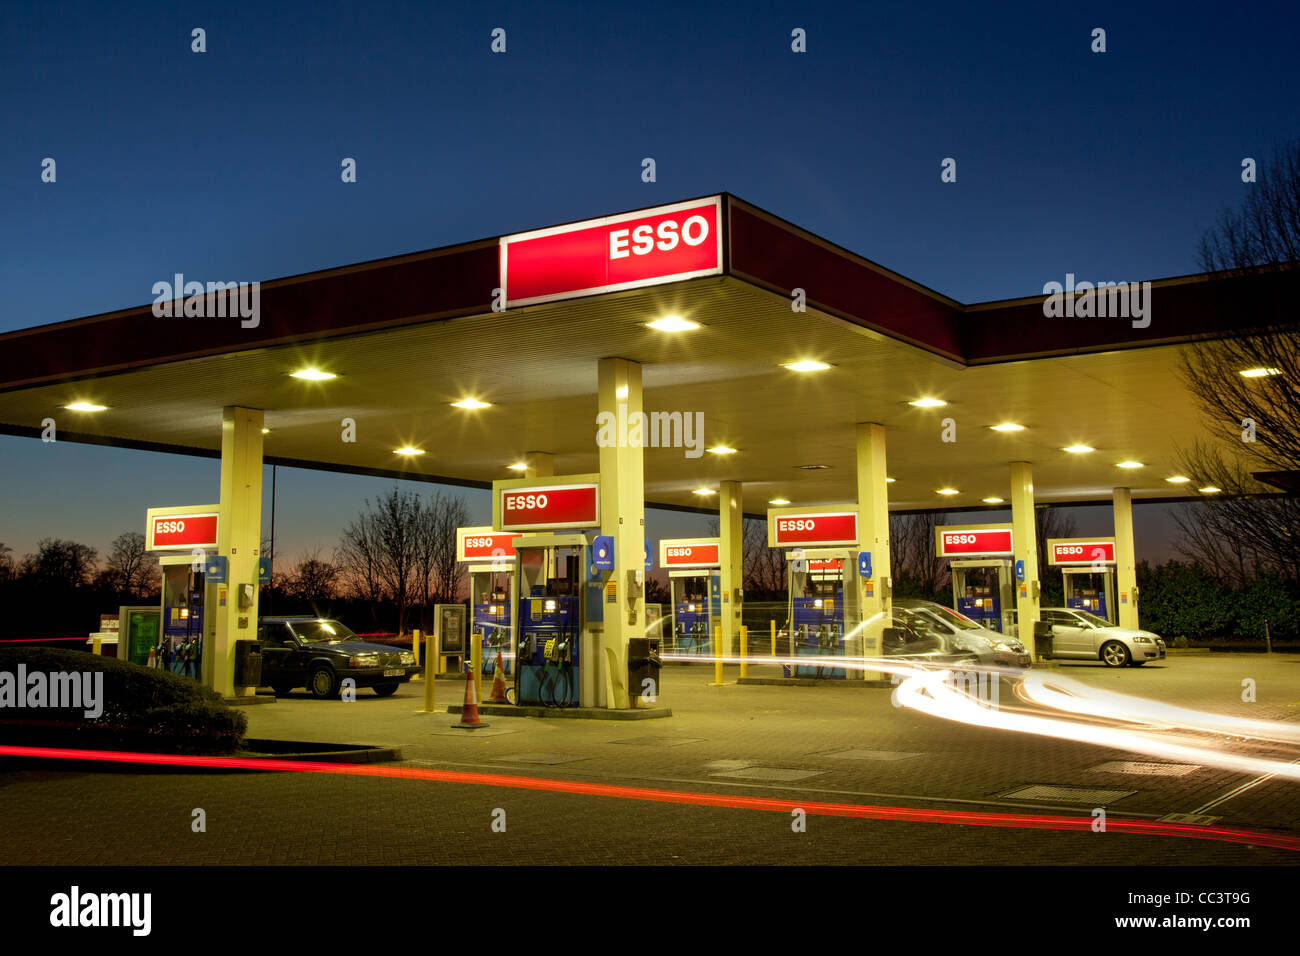 Esso Fuel Petrol garage filling station at night Stock Photo